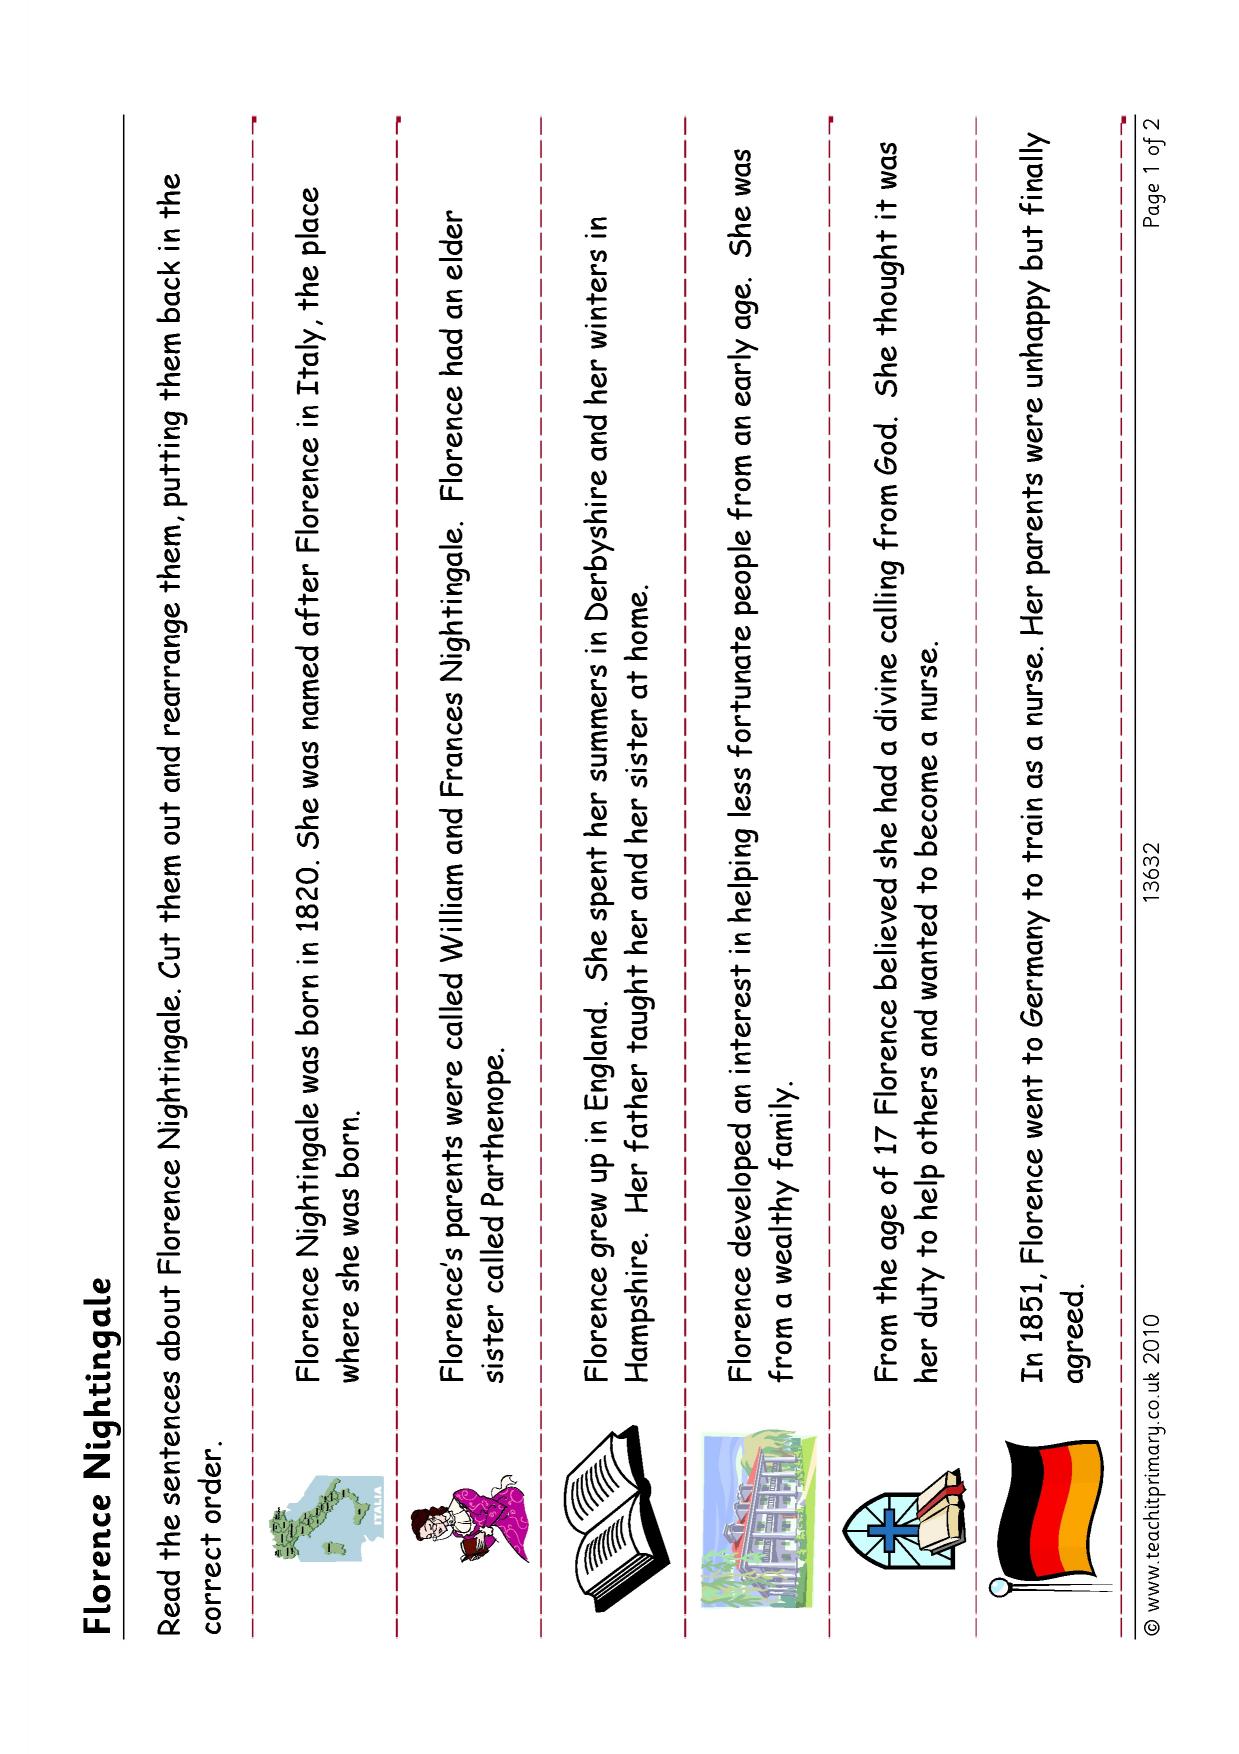 Ready-made sequencing activities - Teachit Primary1239 x 1754